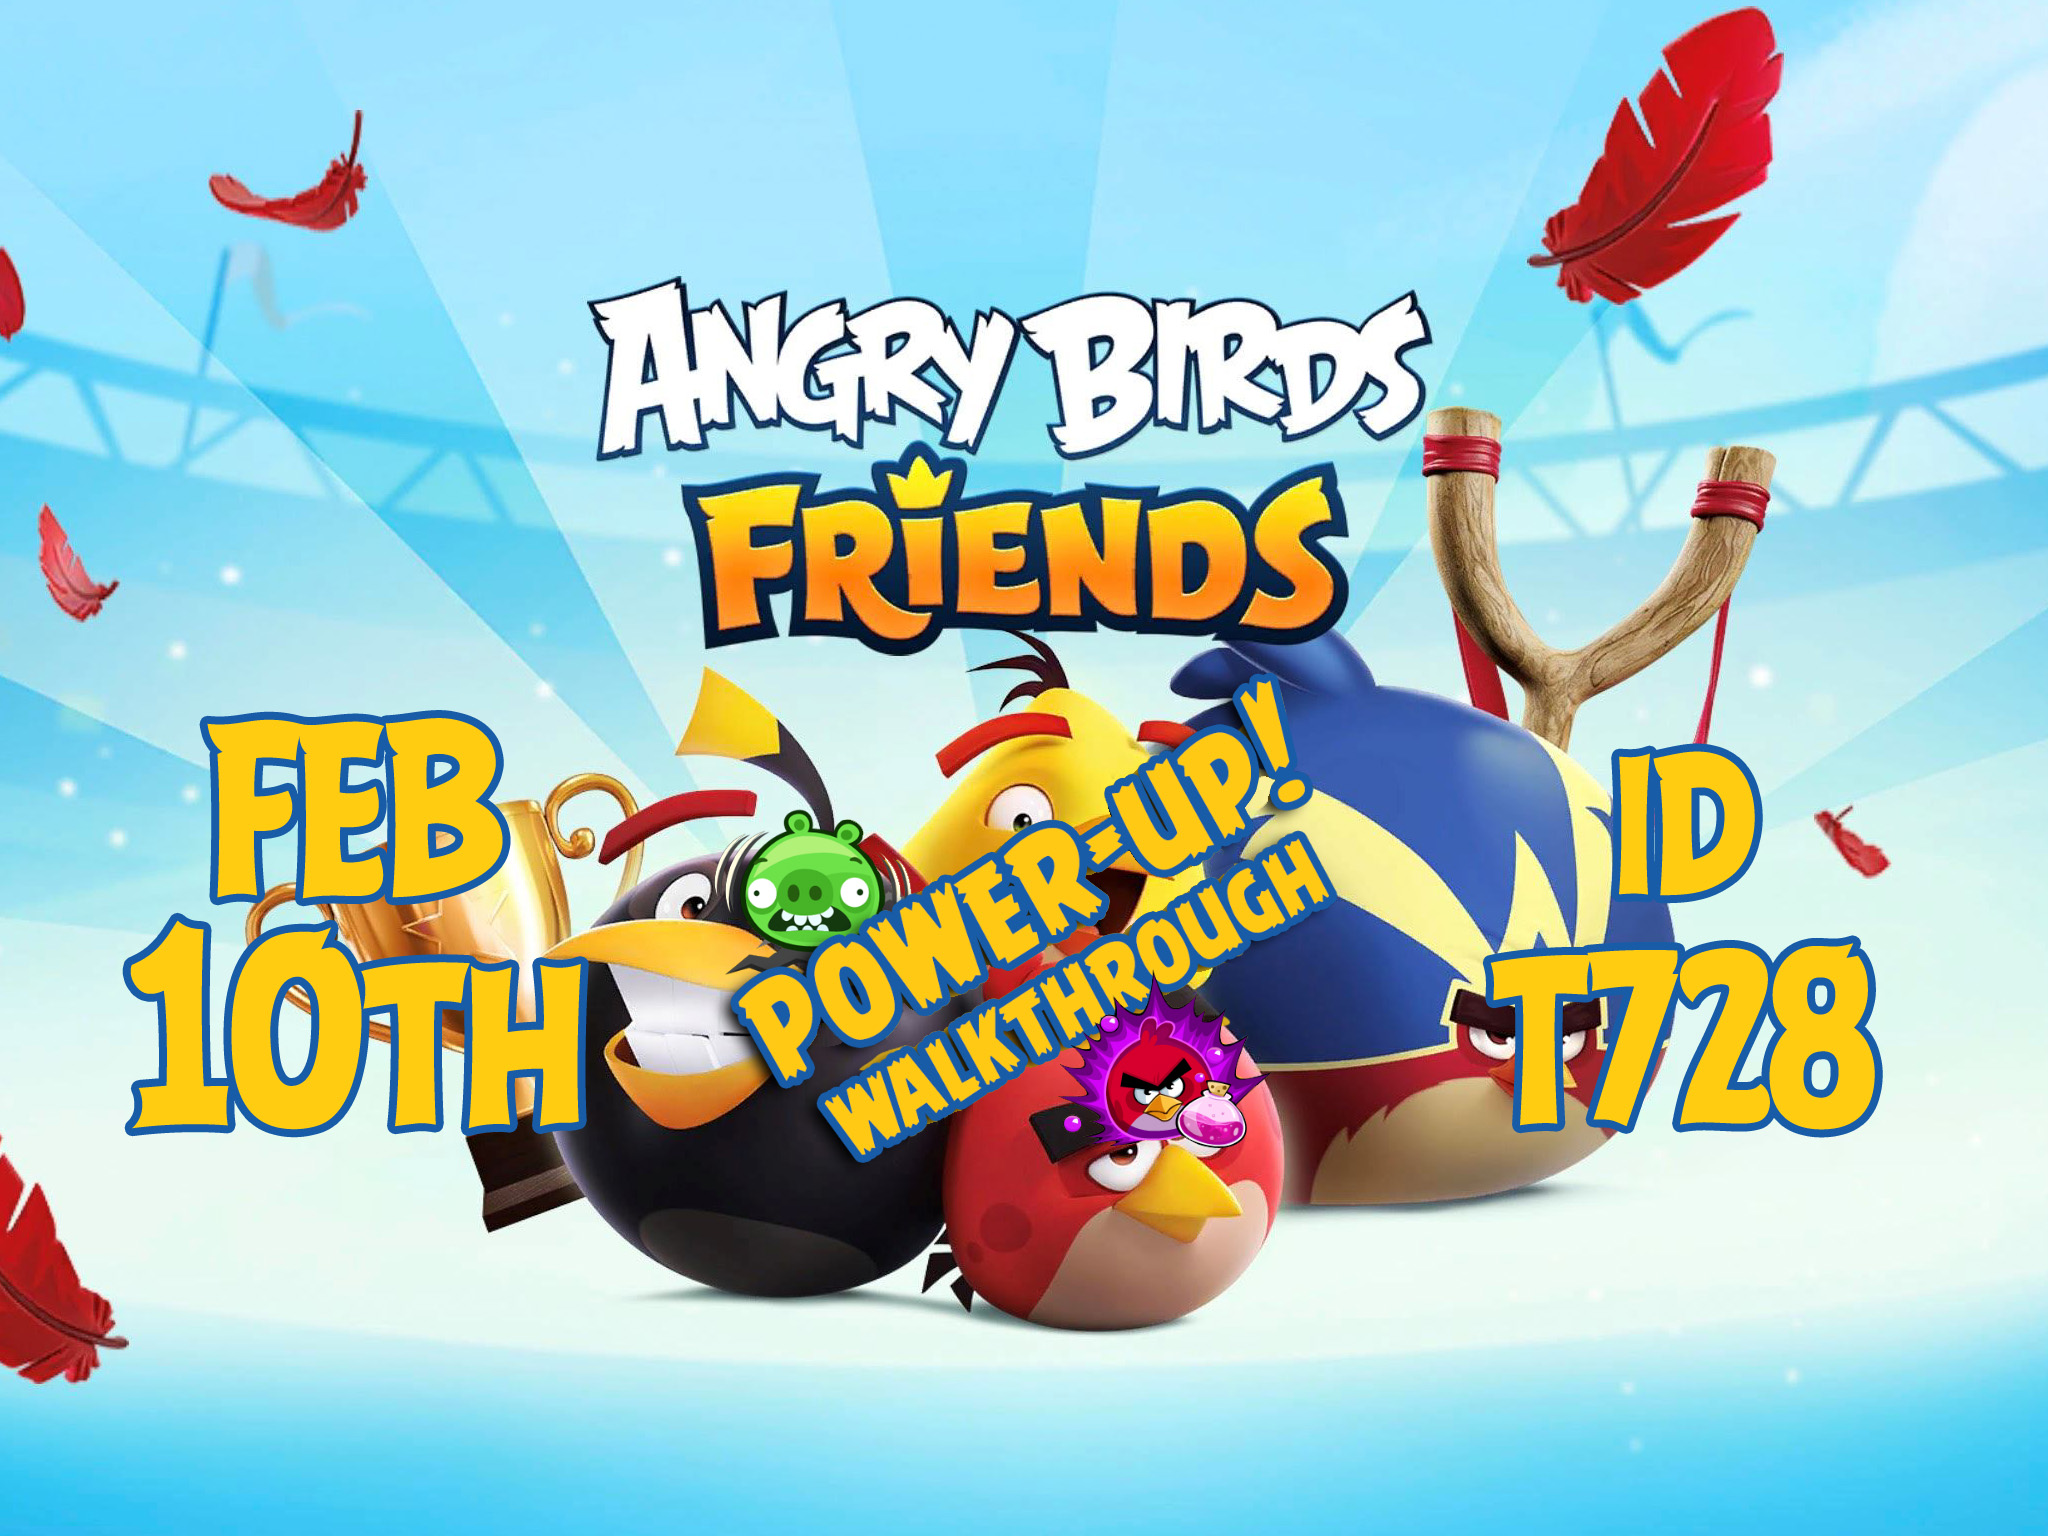 Angry-Birds-Friends-Tournament-T728-Feature-Image-PU